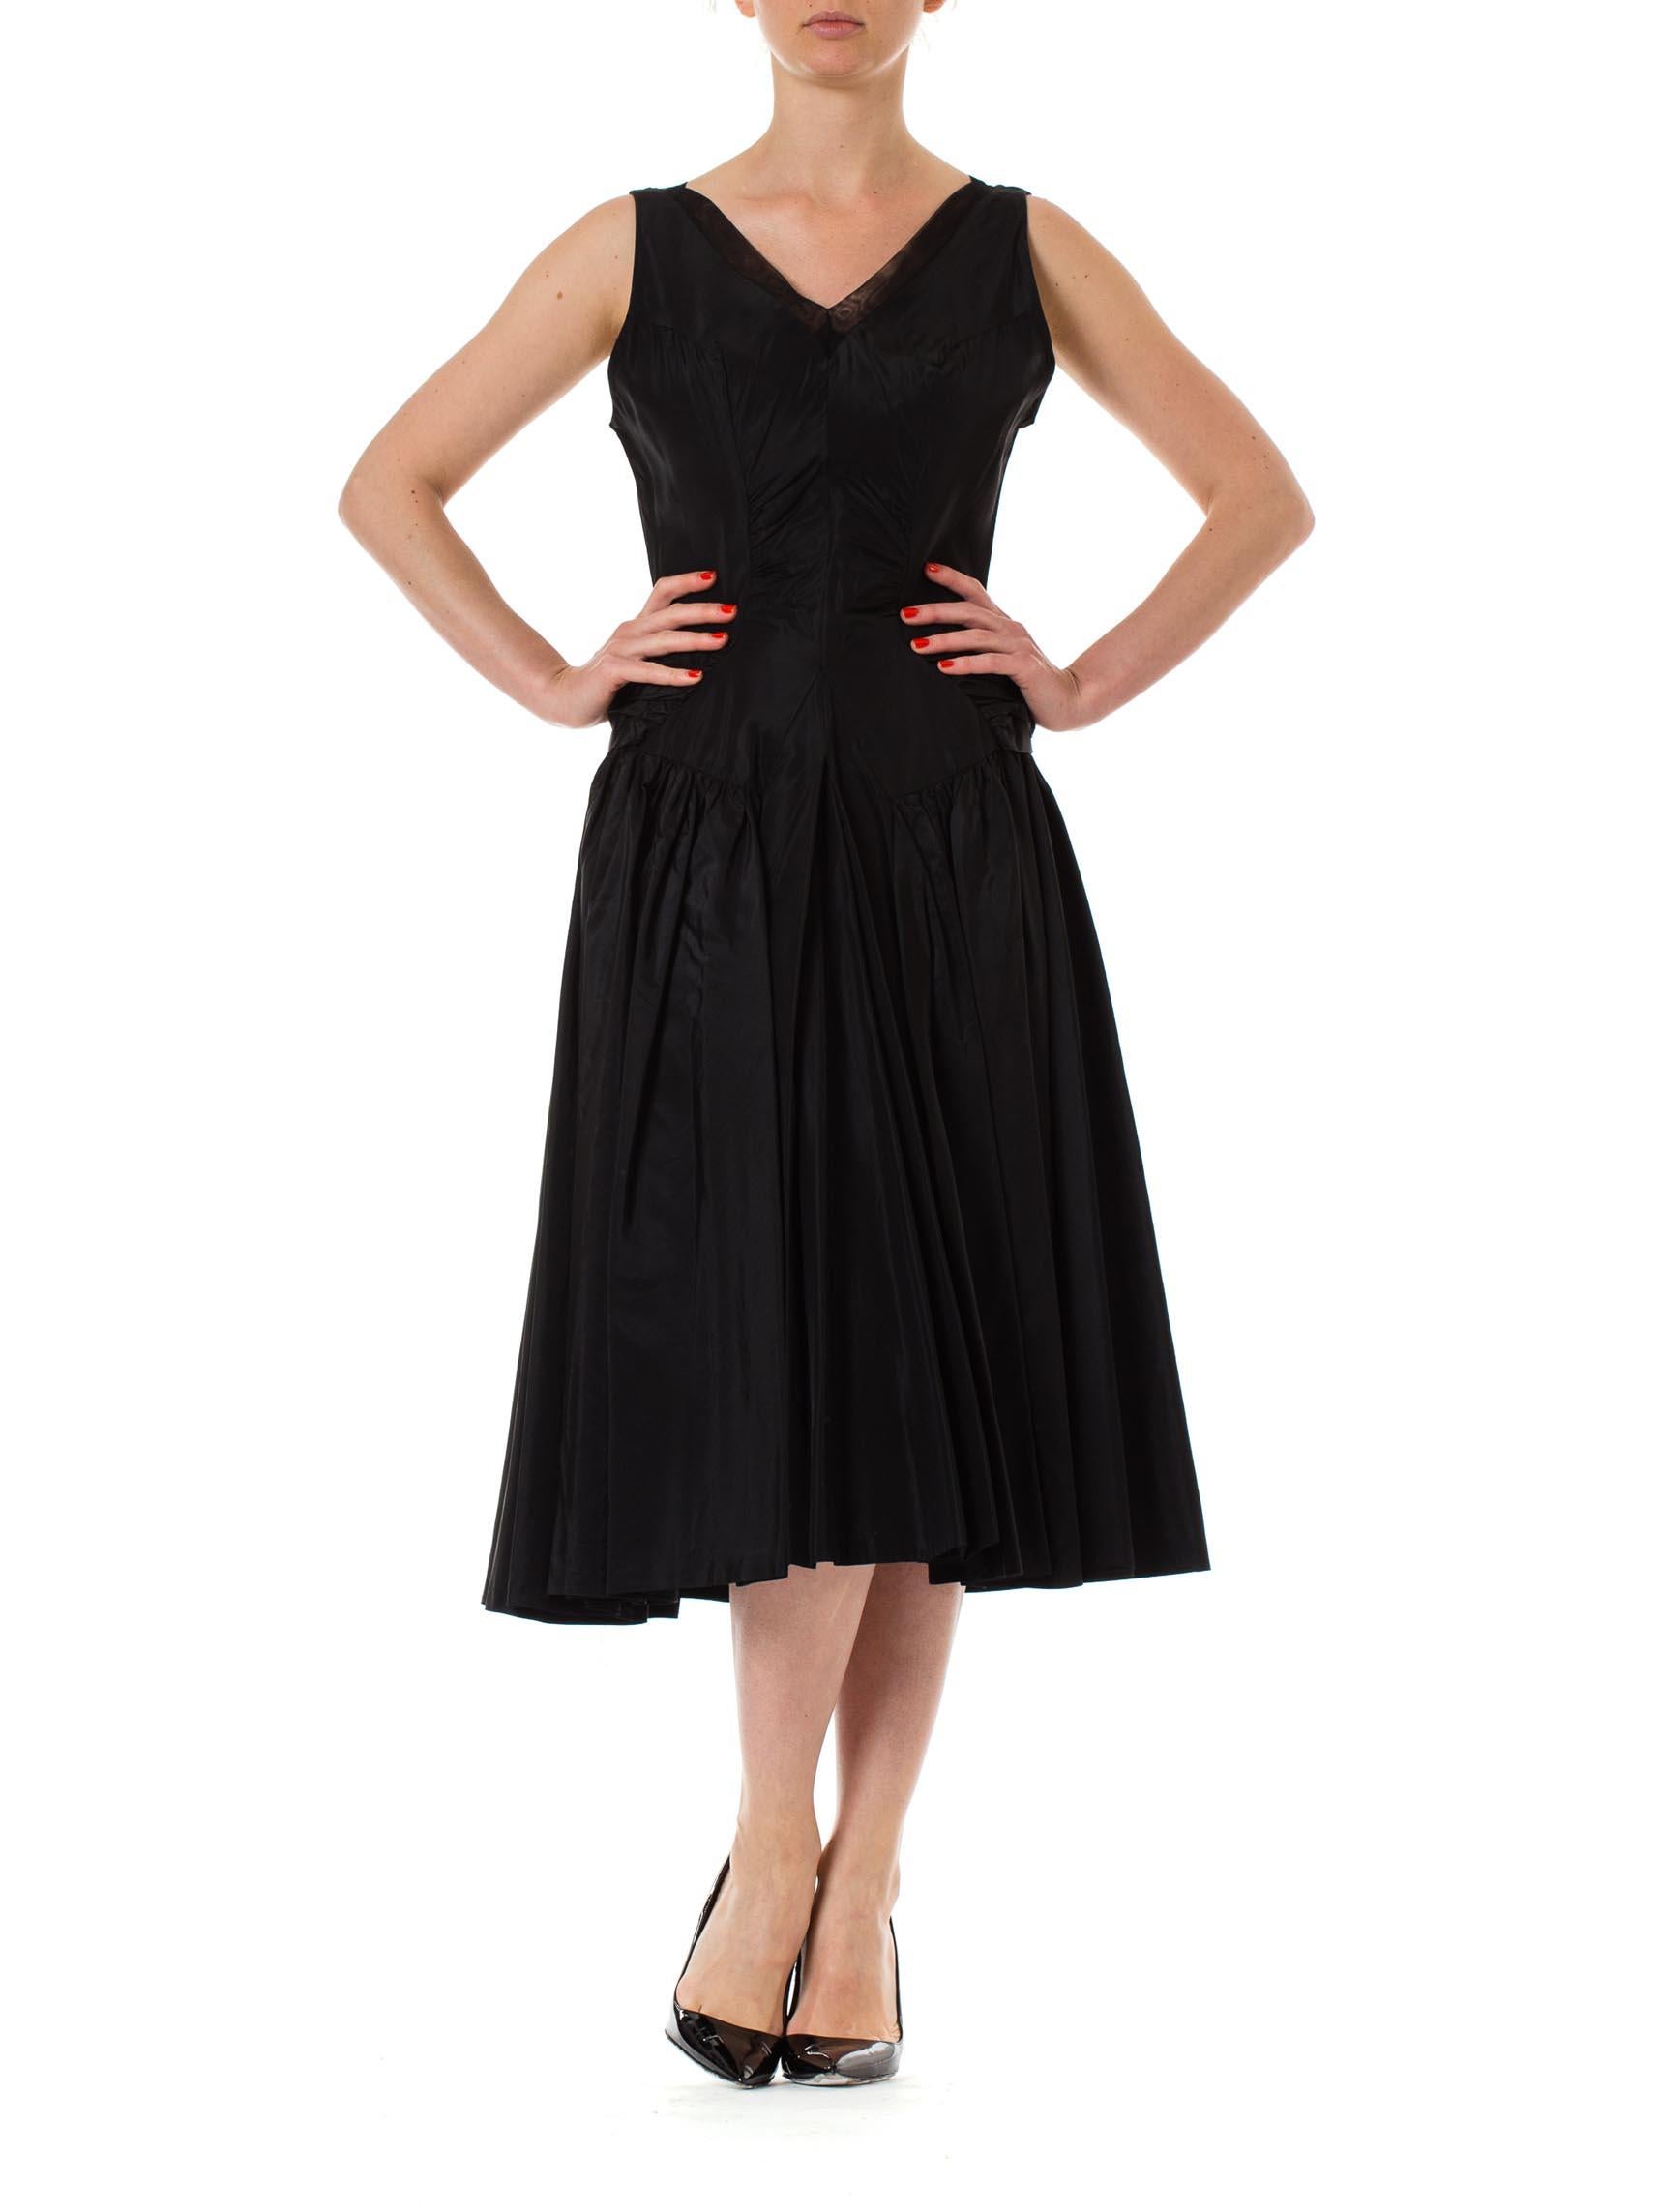 Women's 1950S Black Acetate Taffeta Swing Skirt Cocktail Dress With Unique Gathered Det For Sale